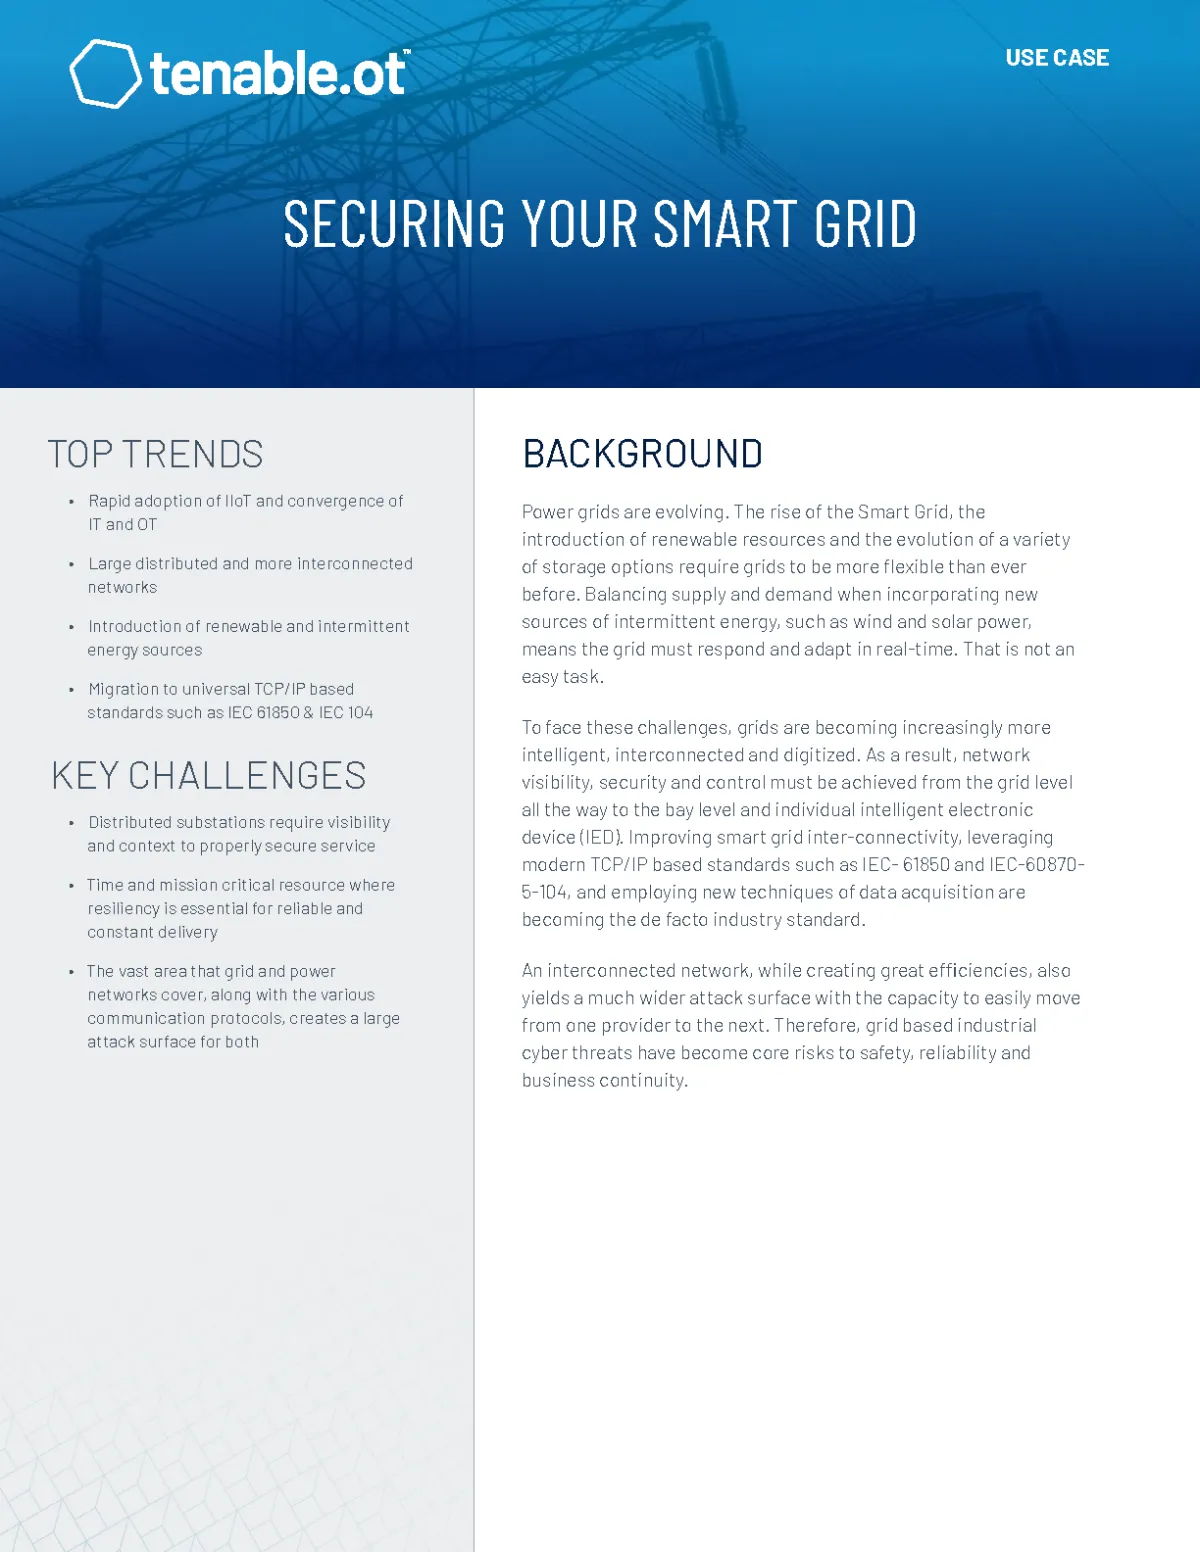 Use Case: Tenable.ot - Securing Your Smart Grid